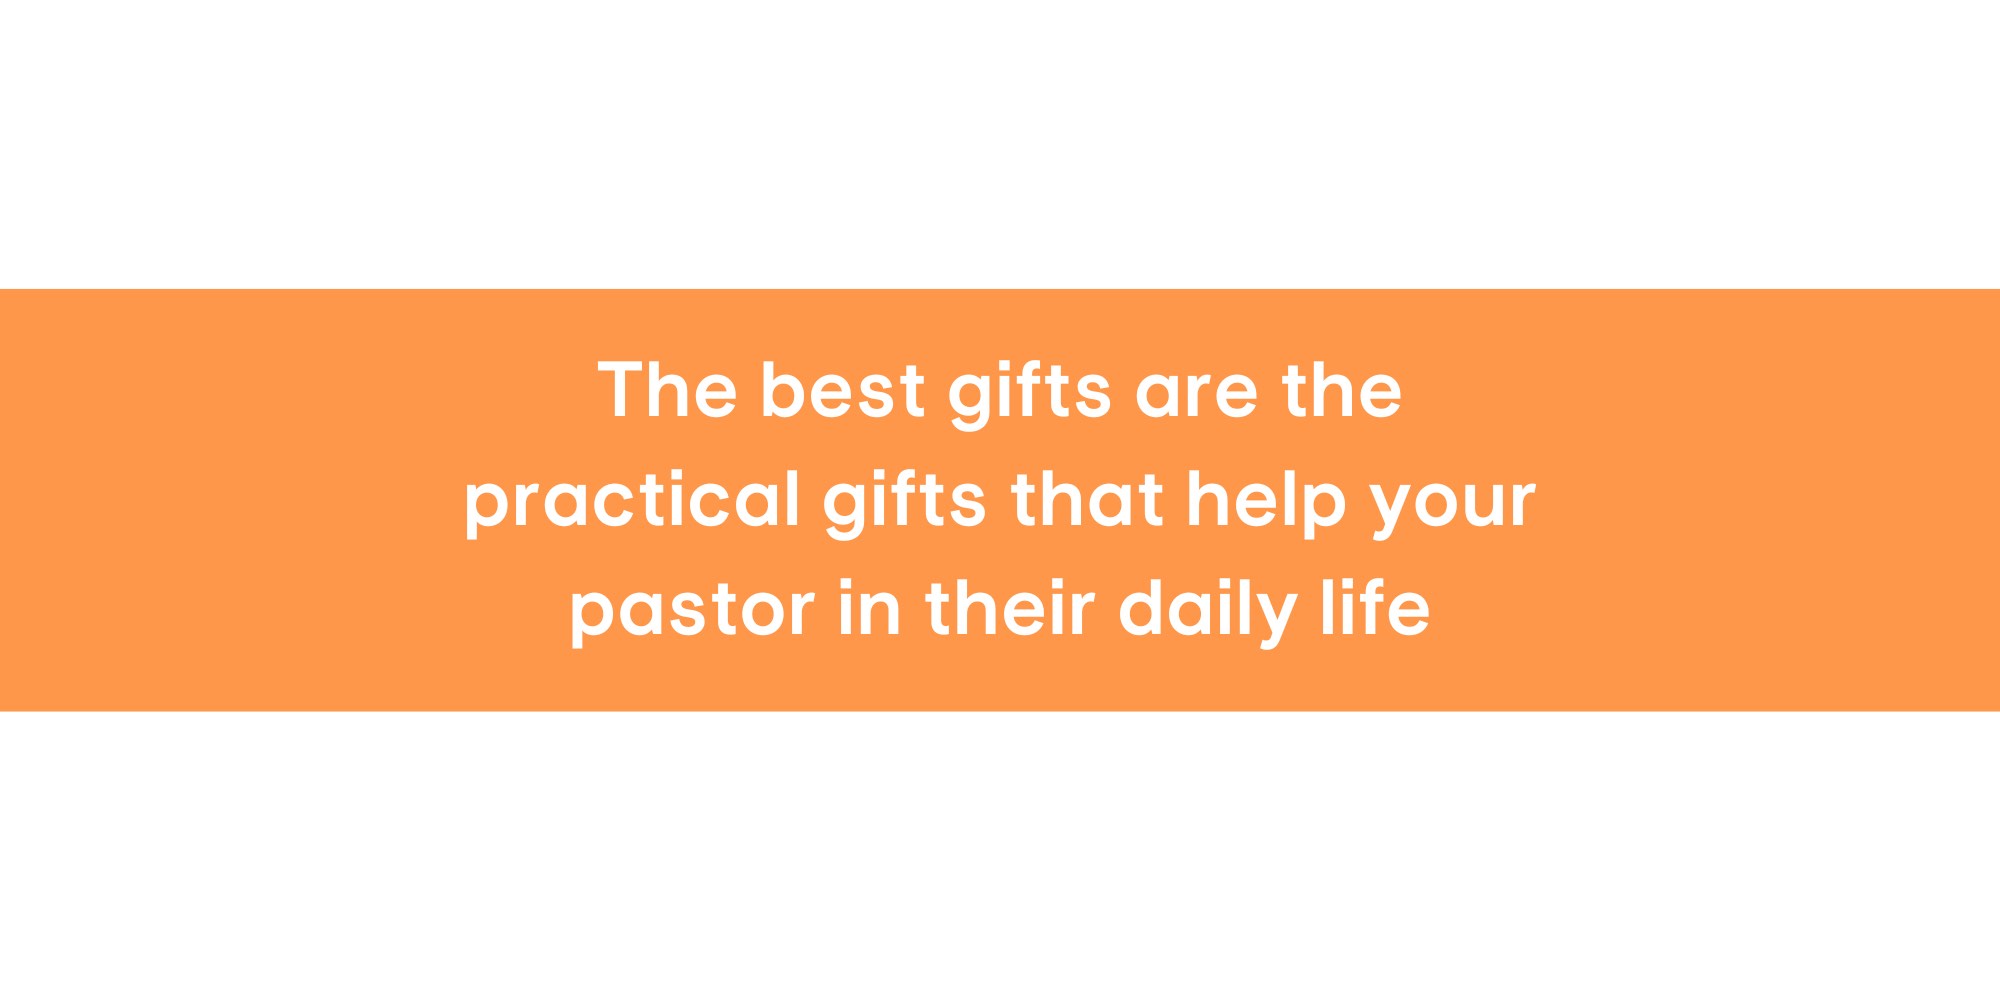 The best pastor appreciation gifts are the ones that help them in their daily life